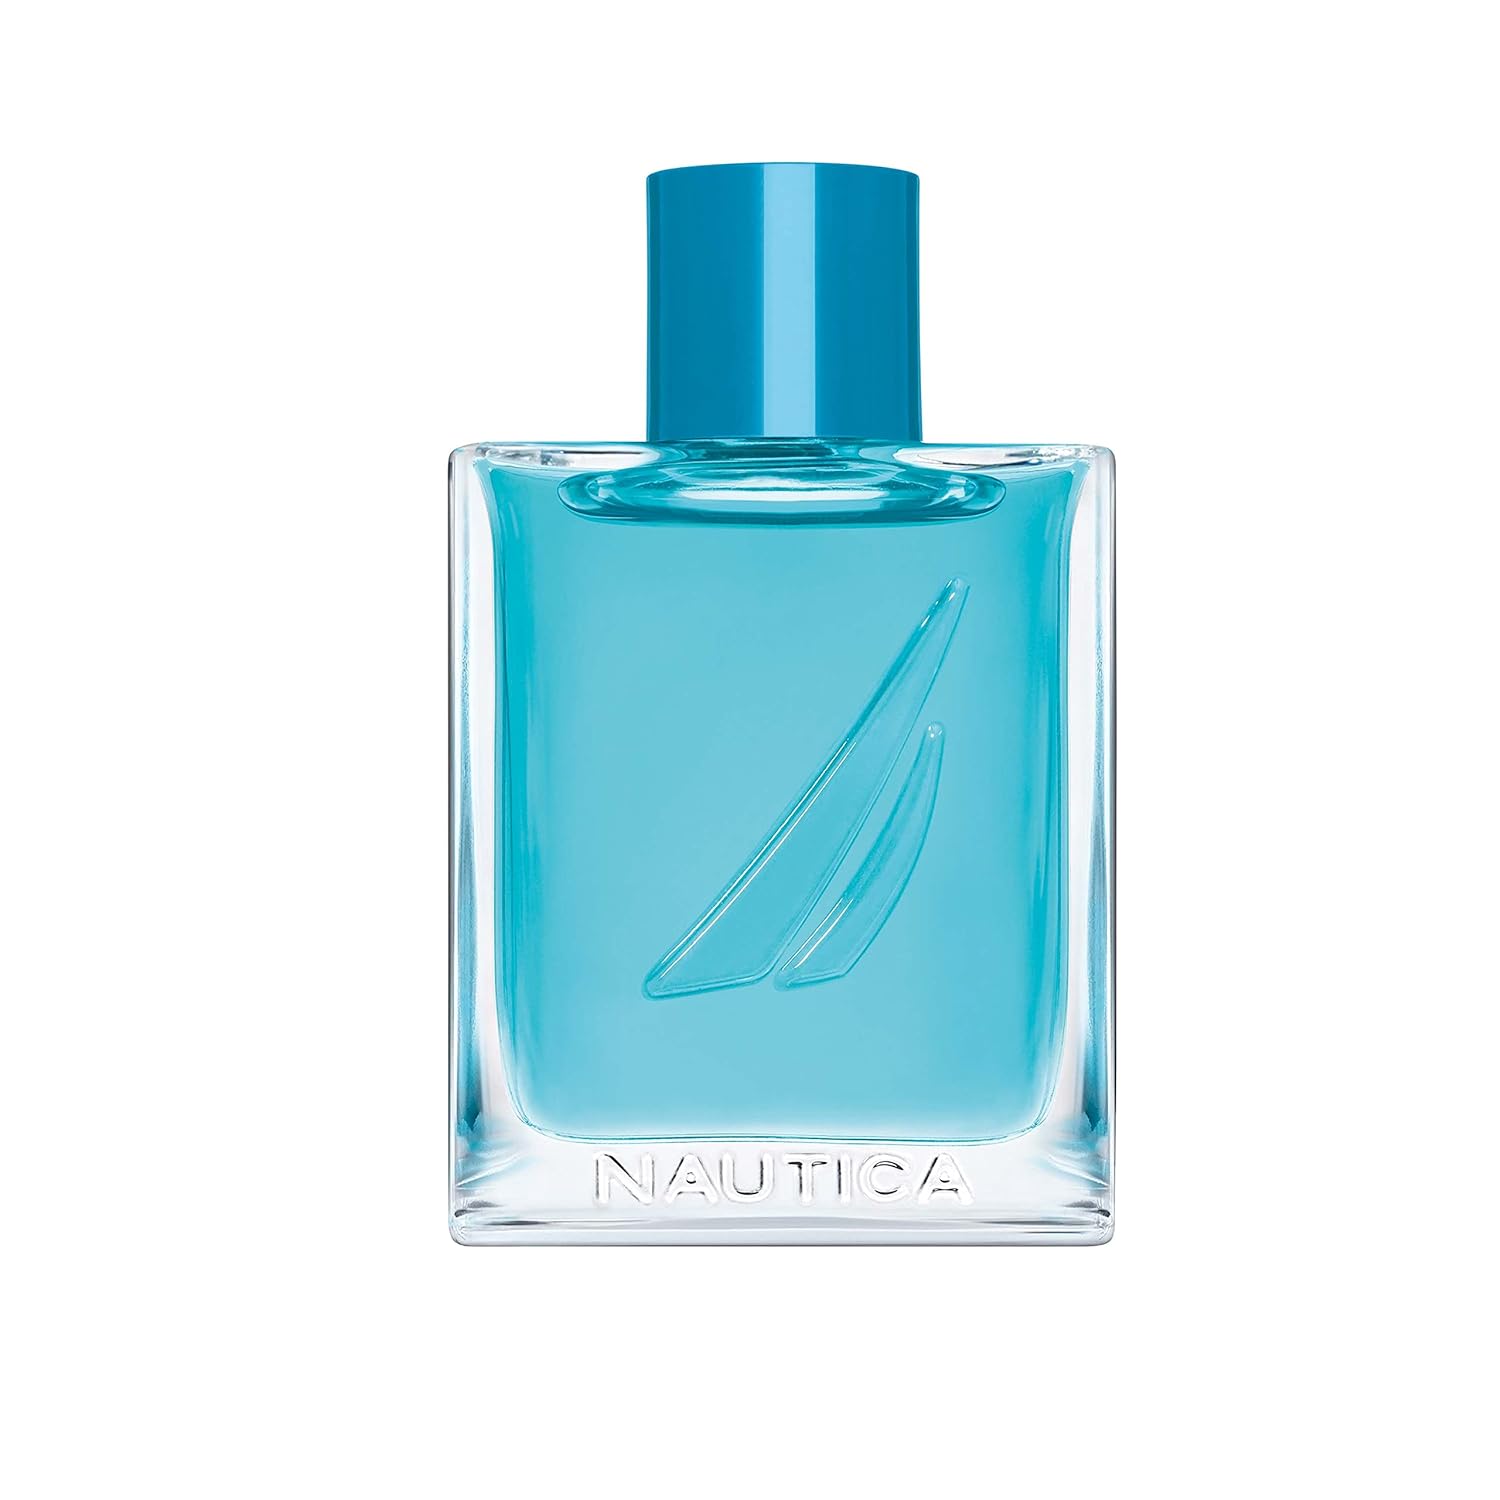 Nautica Oceans Pacific Coast Eau De Toilette - Uplifting, Refreshing Scent - Earthy, Marine Notes of Pinewood and Mint - Ideal for Day Wear - 1.6 Fl Oz. : Beauty & Personal Care